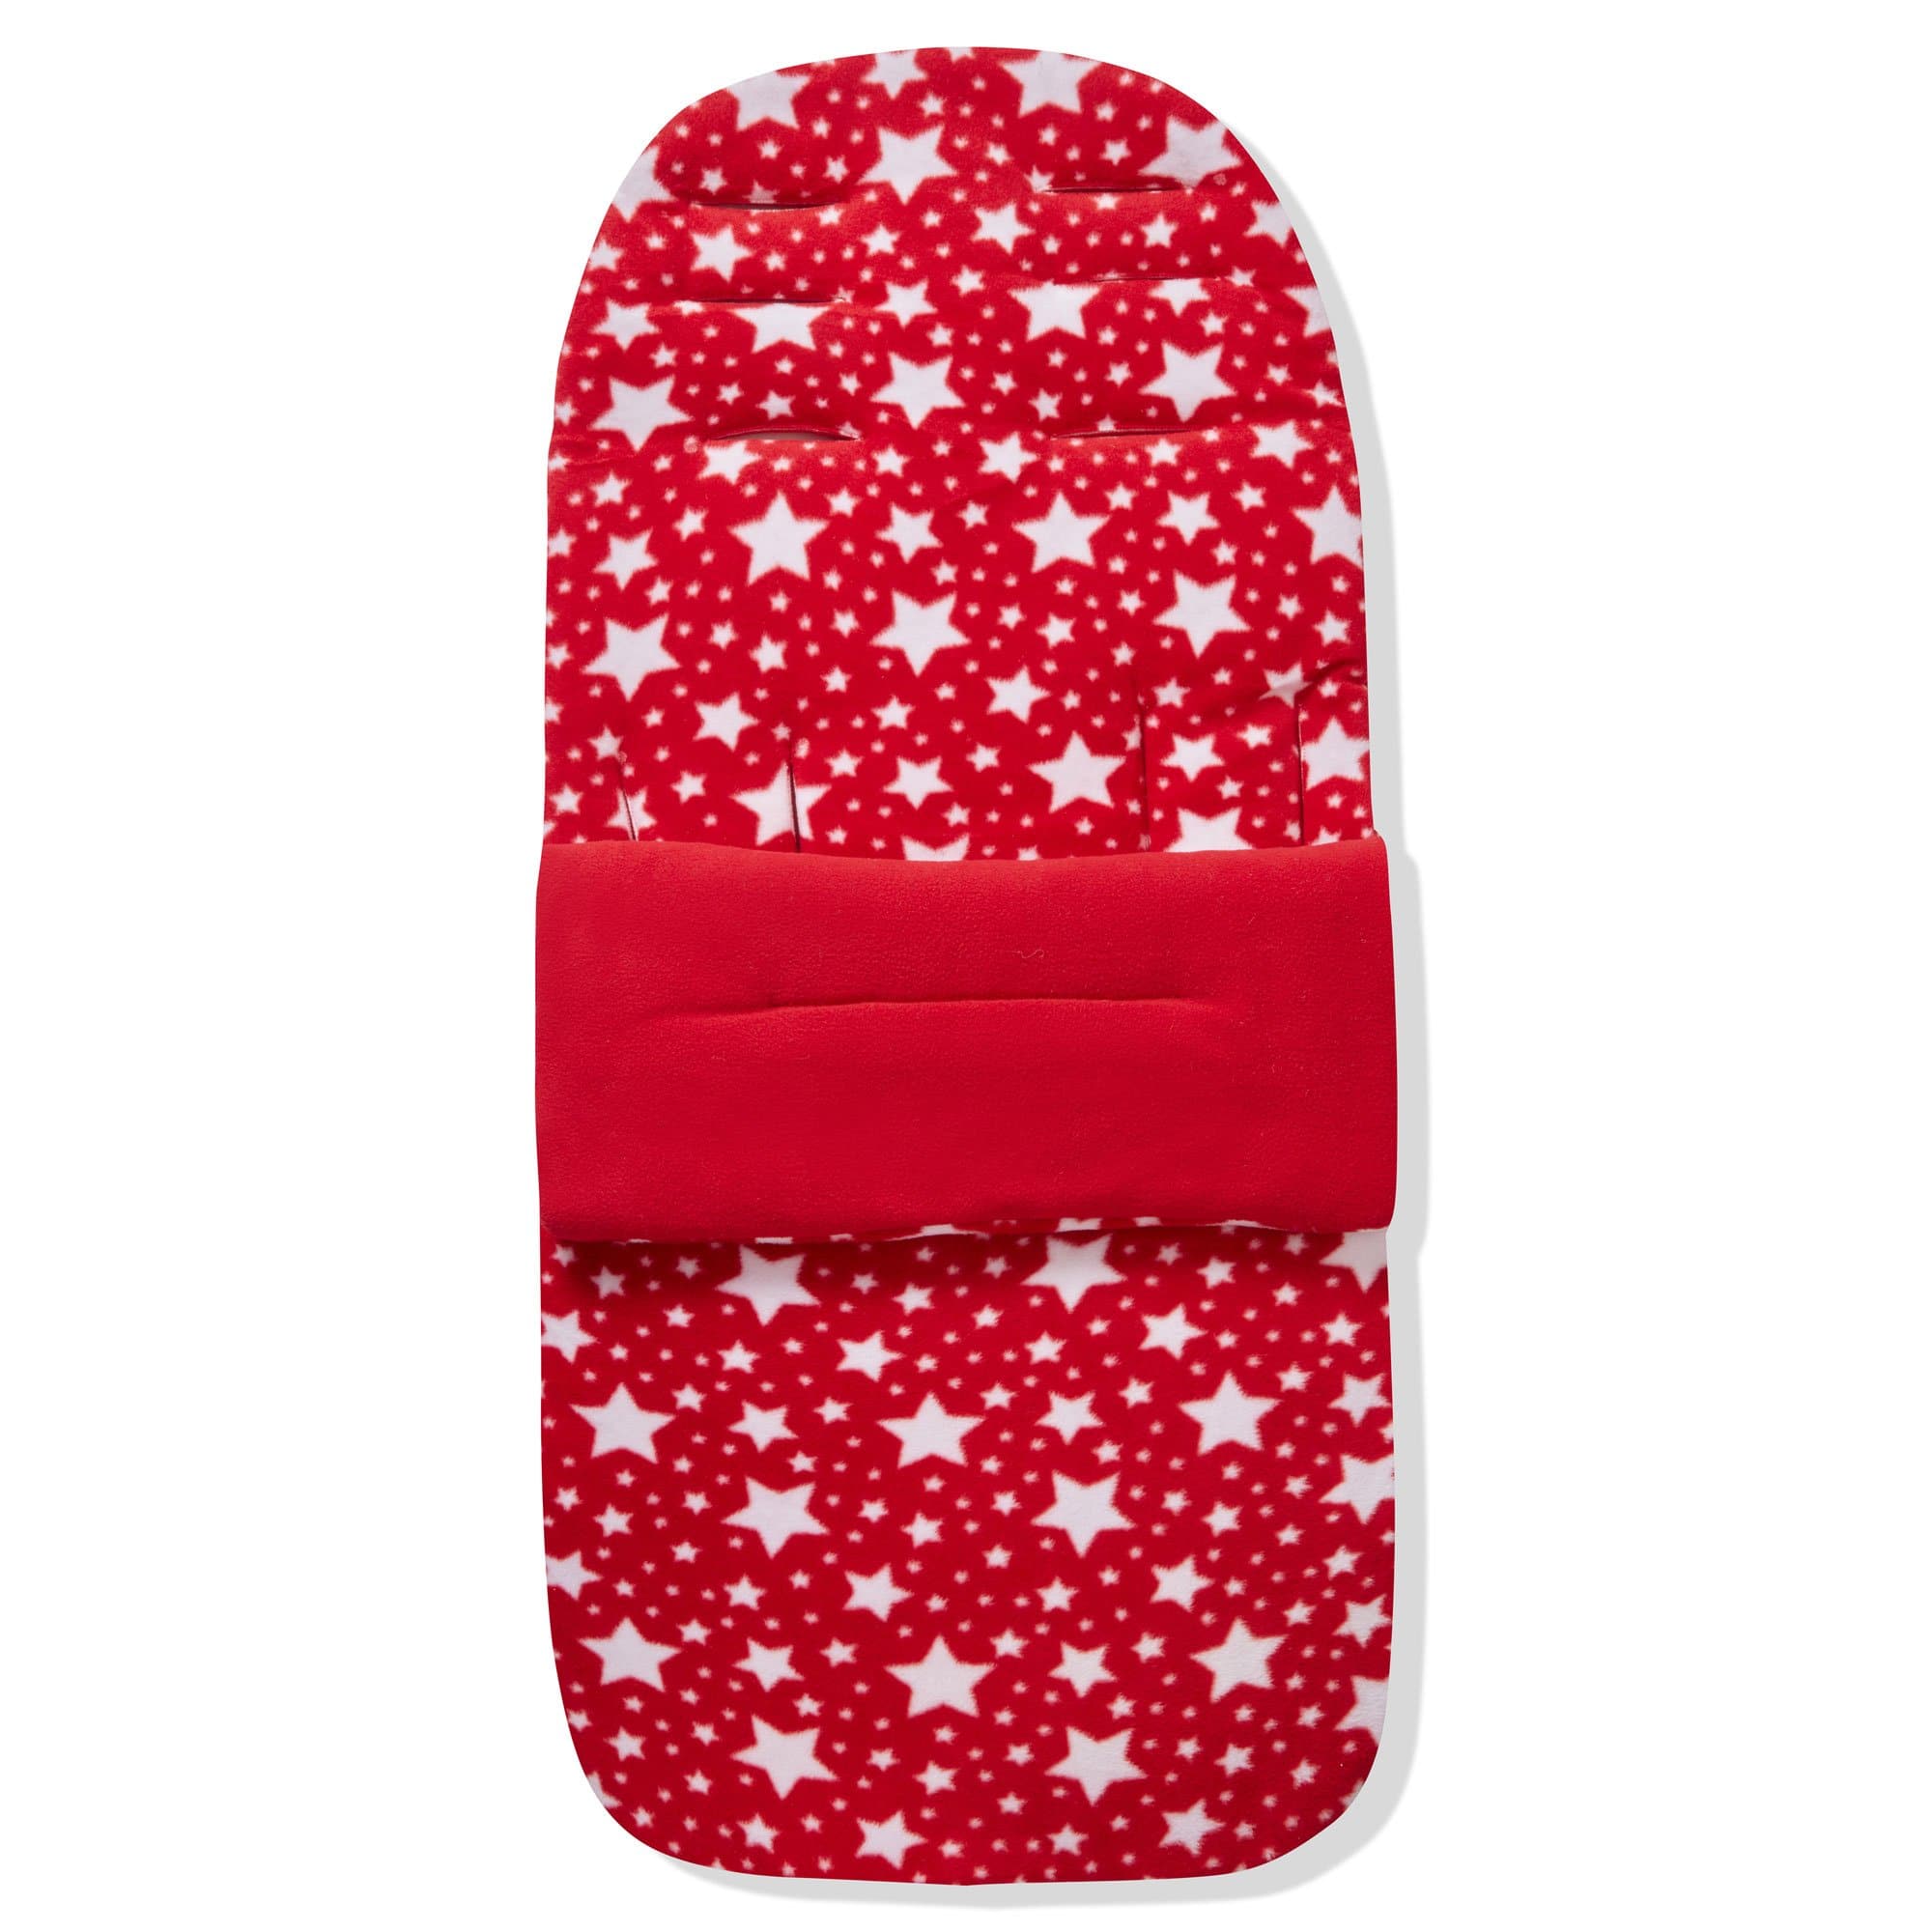 Universal Fleece Pushchair Footmuff / Cosy Toes - Fits All Pushchairs / Prams And Buggies - Red Star / Fits All Models | For Your Little One